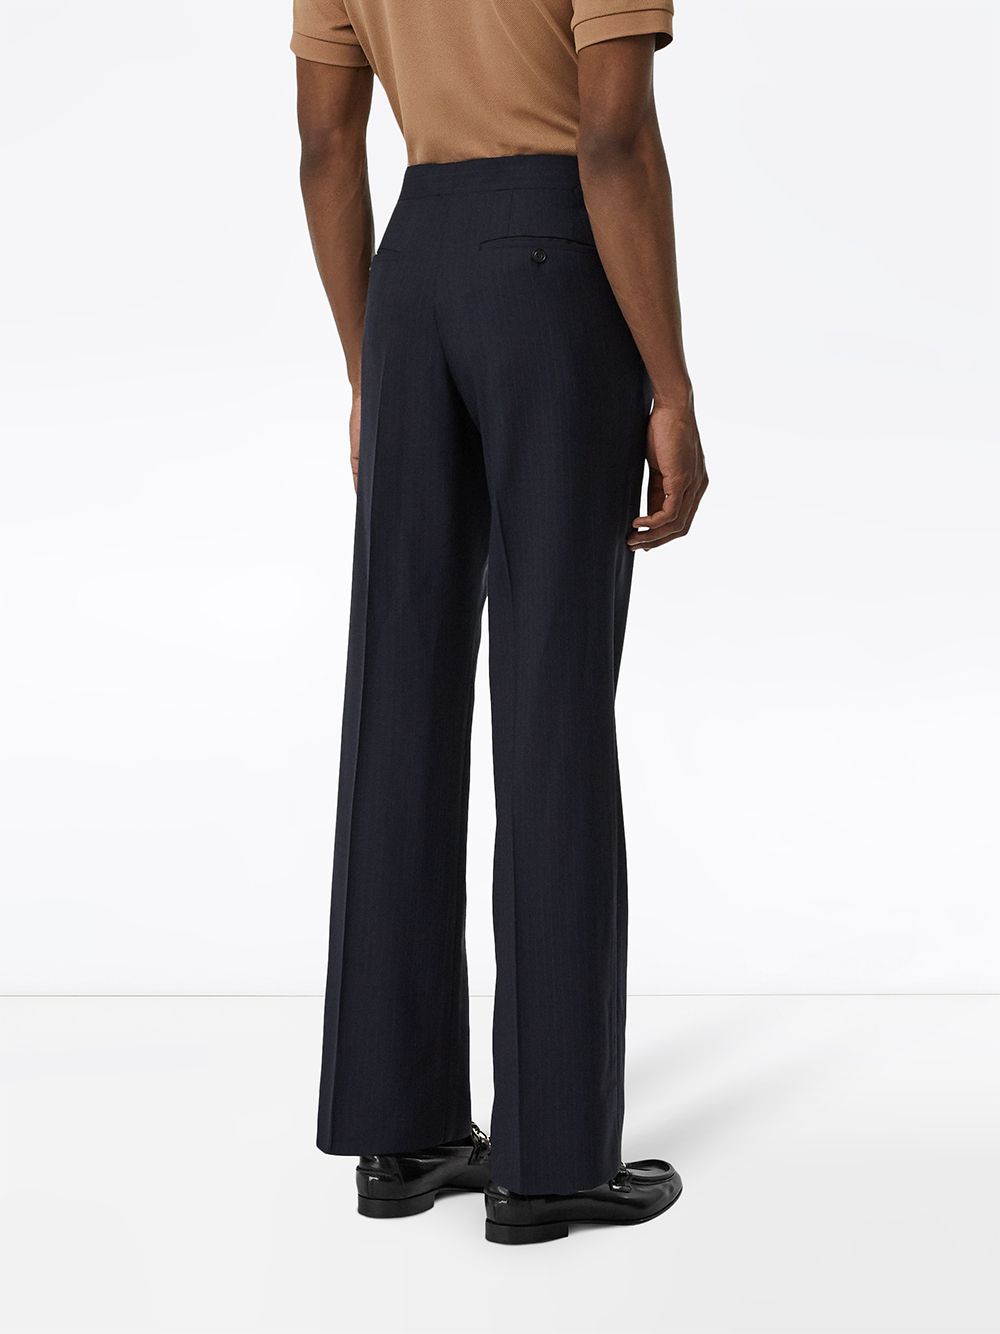 Burberry Classic Fit Pinstriped Wool Tailored Trousers - Farfetch